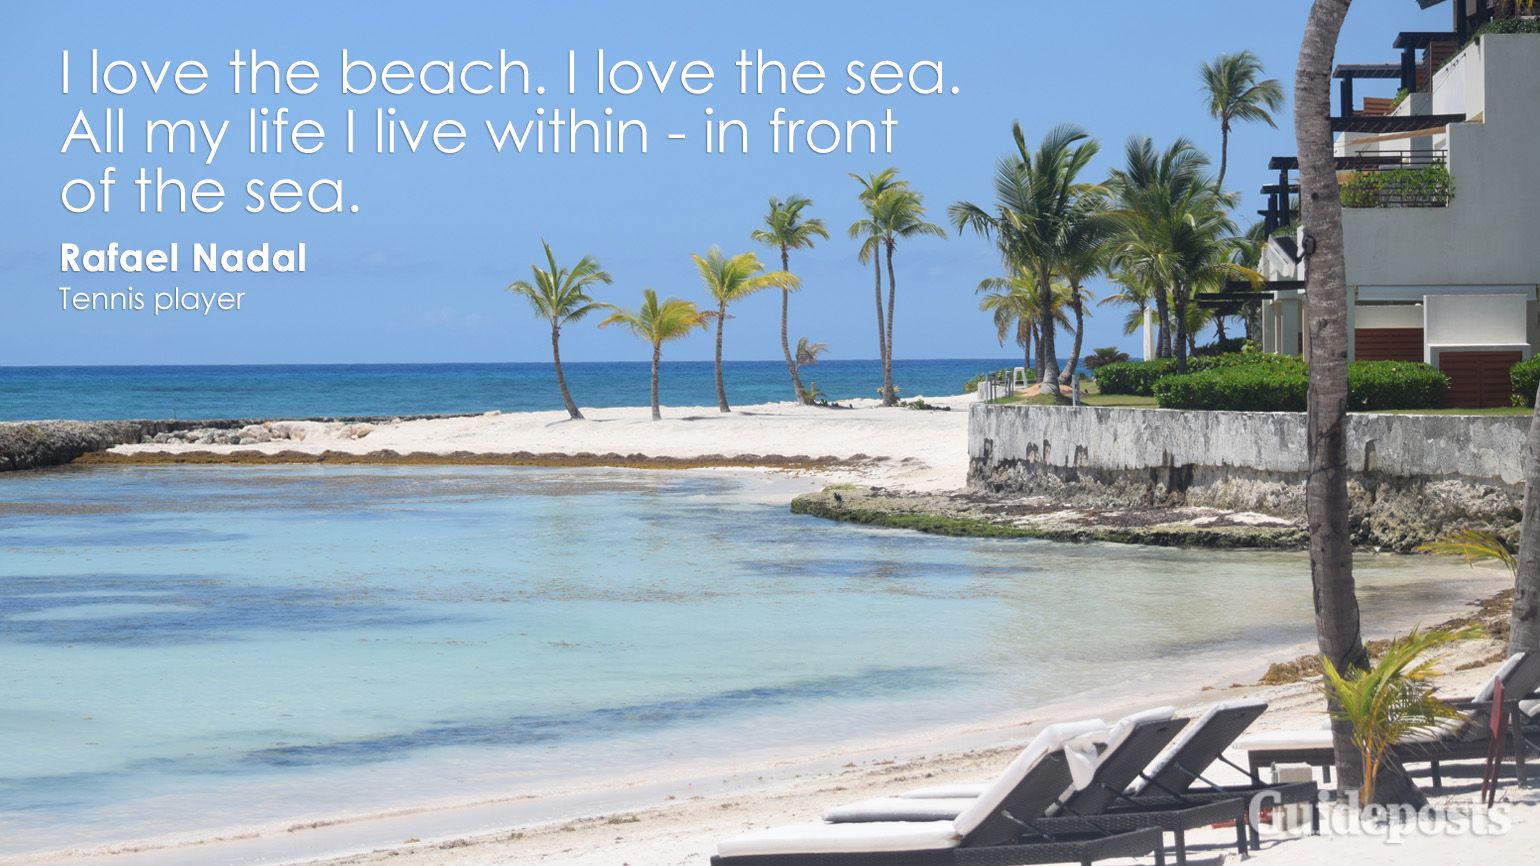 I love the beach. I love the sea. All my life I live within - in front of the sea. Rafael Nadal